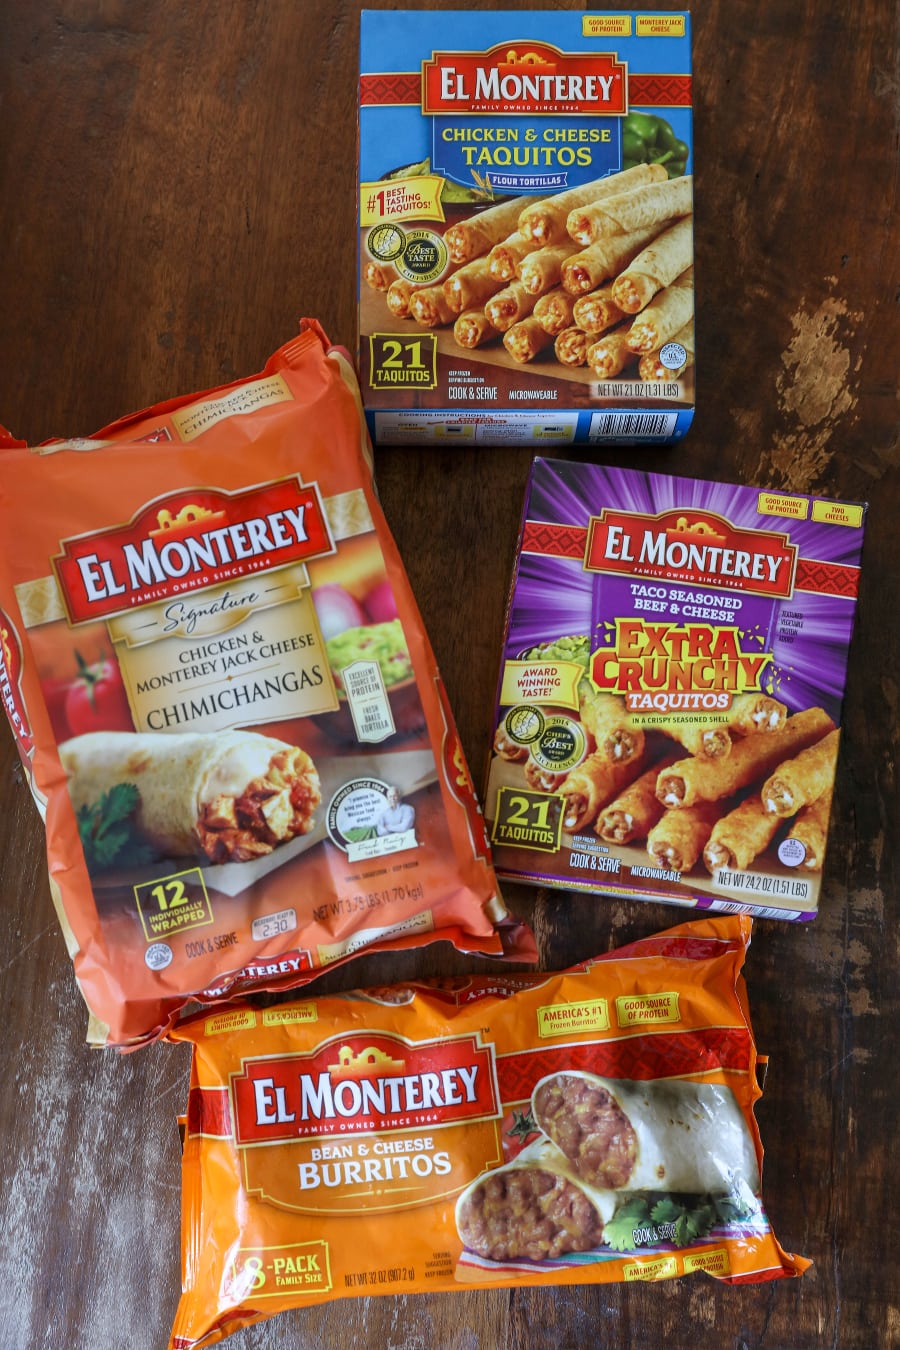 El Monterey Taquitos and Burritos - some of the kids' favorite after school snacks!